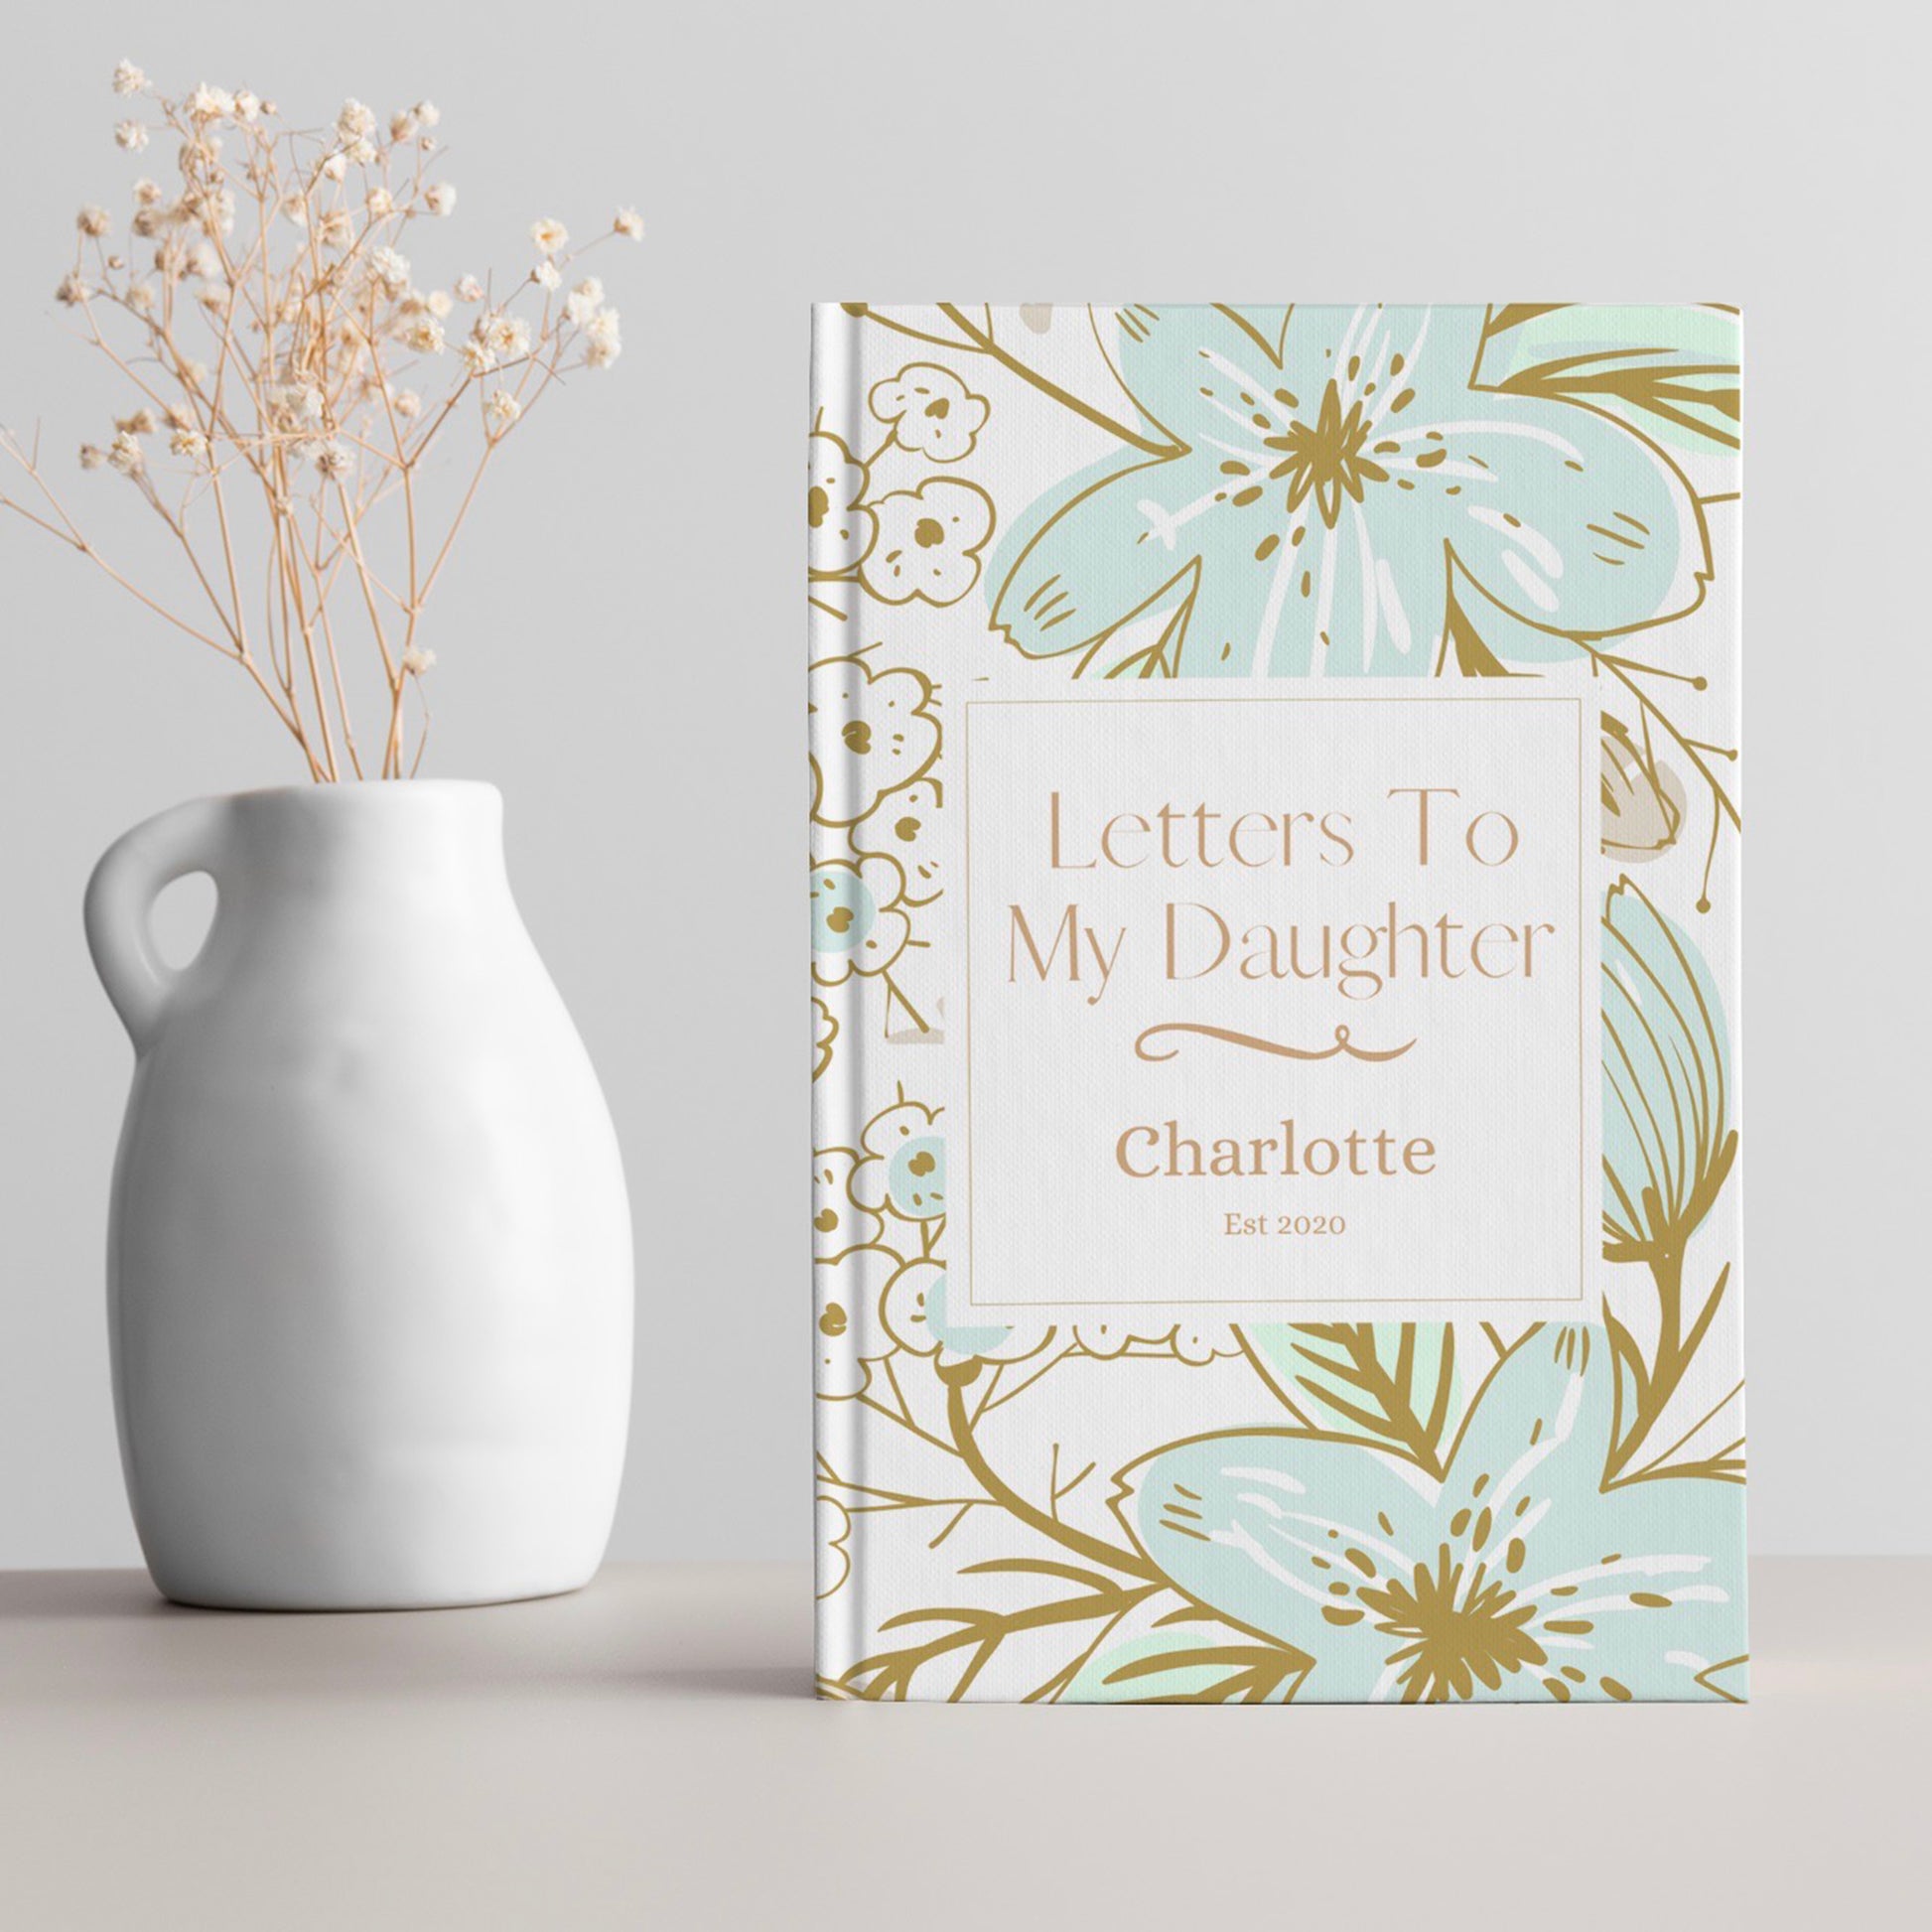 Letters To You My Daughter: A Blank Scrapbook Journal Keepsake